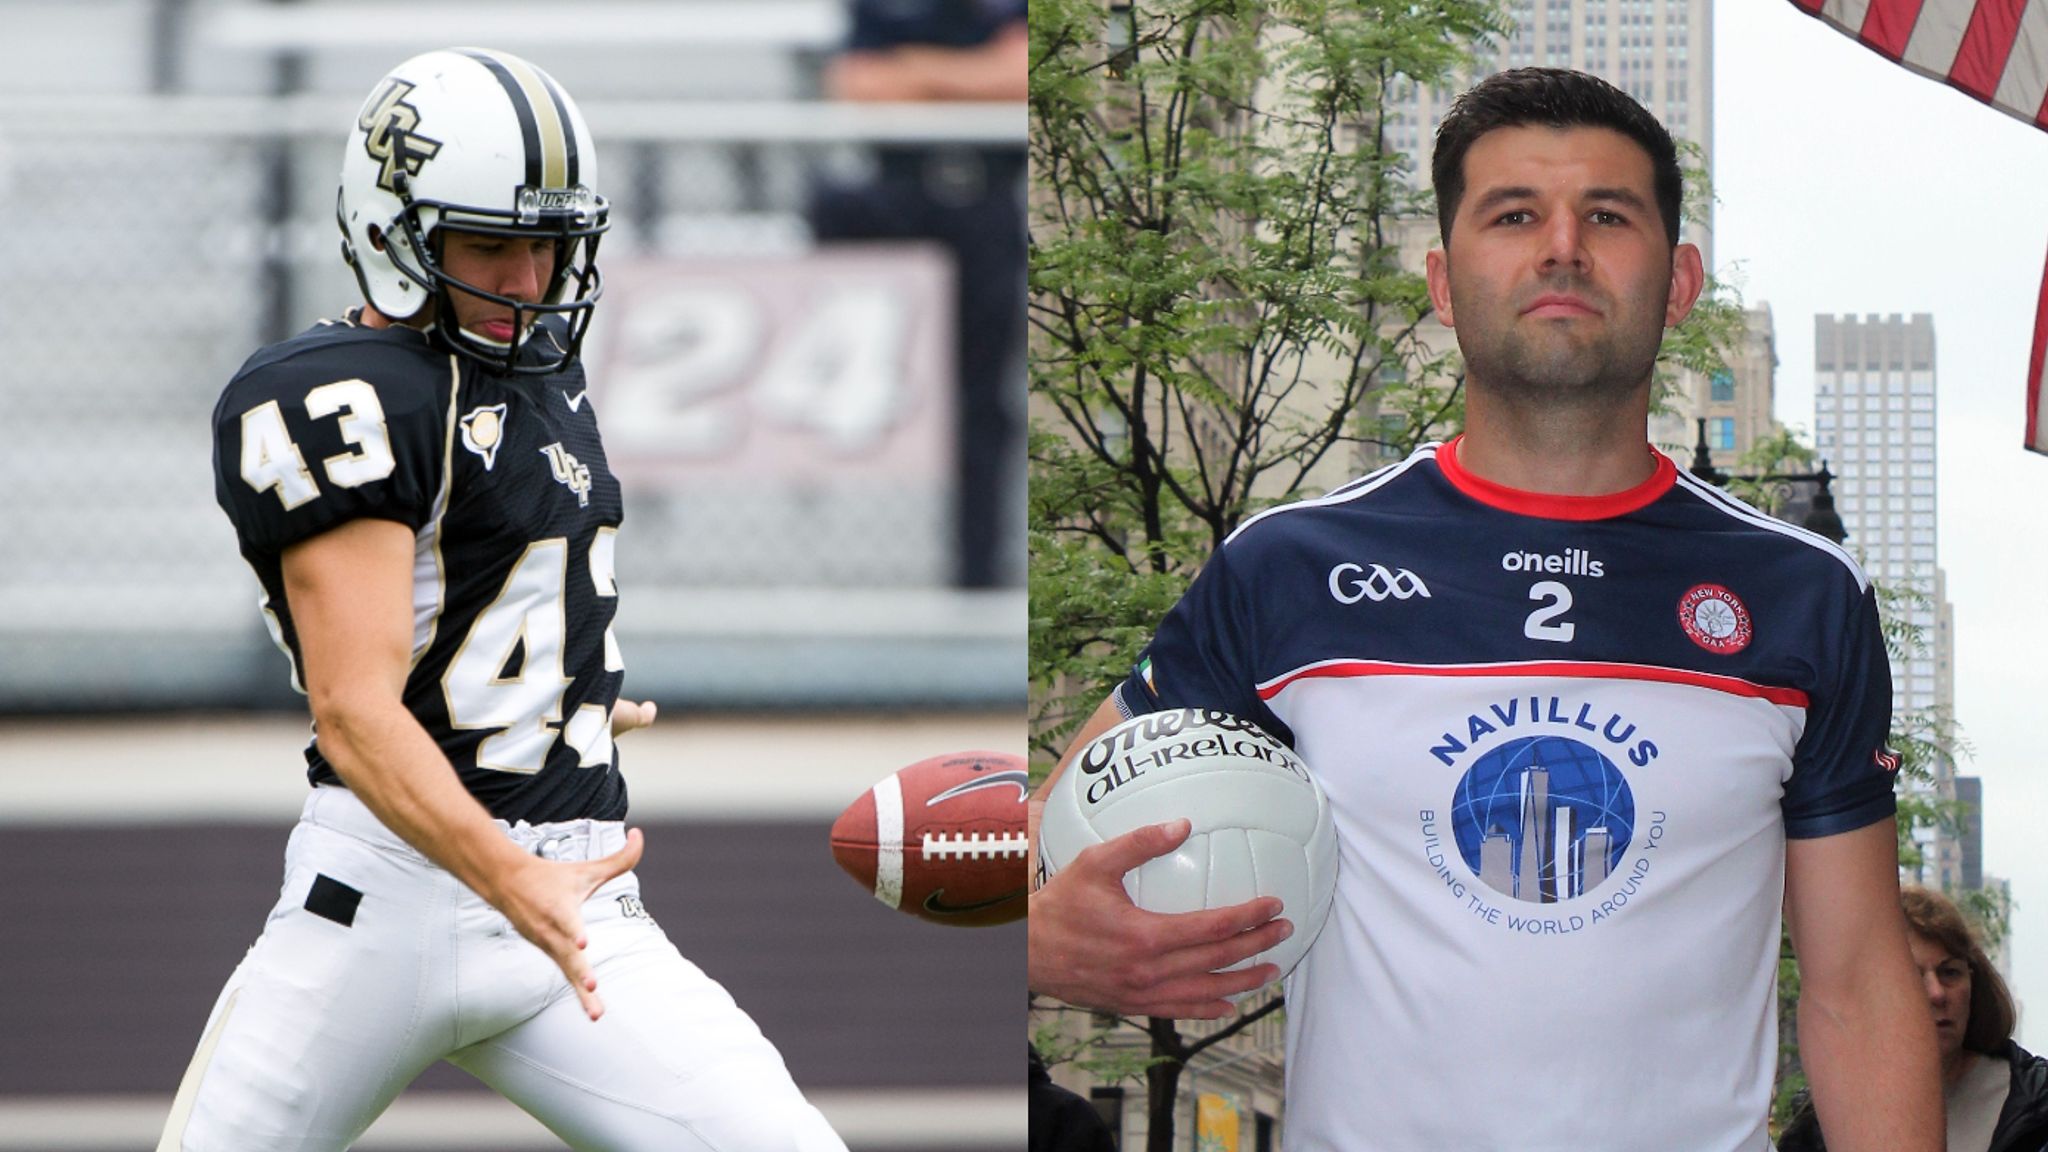 Jamie Boyle: The American football punter now captaining New